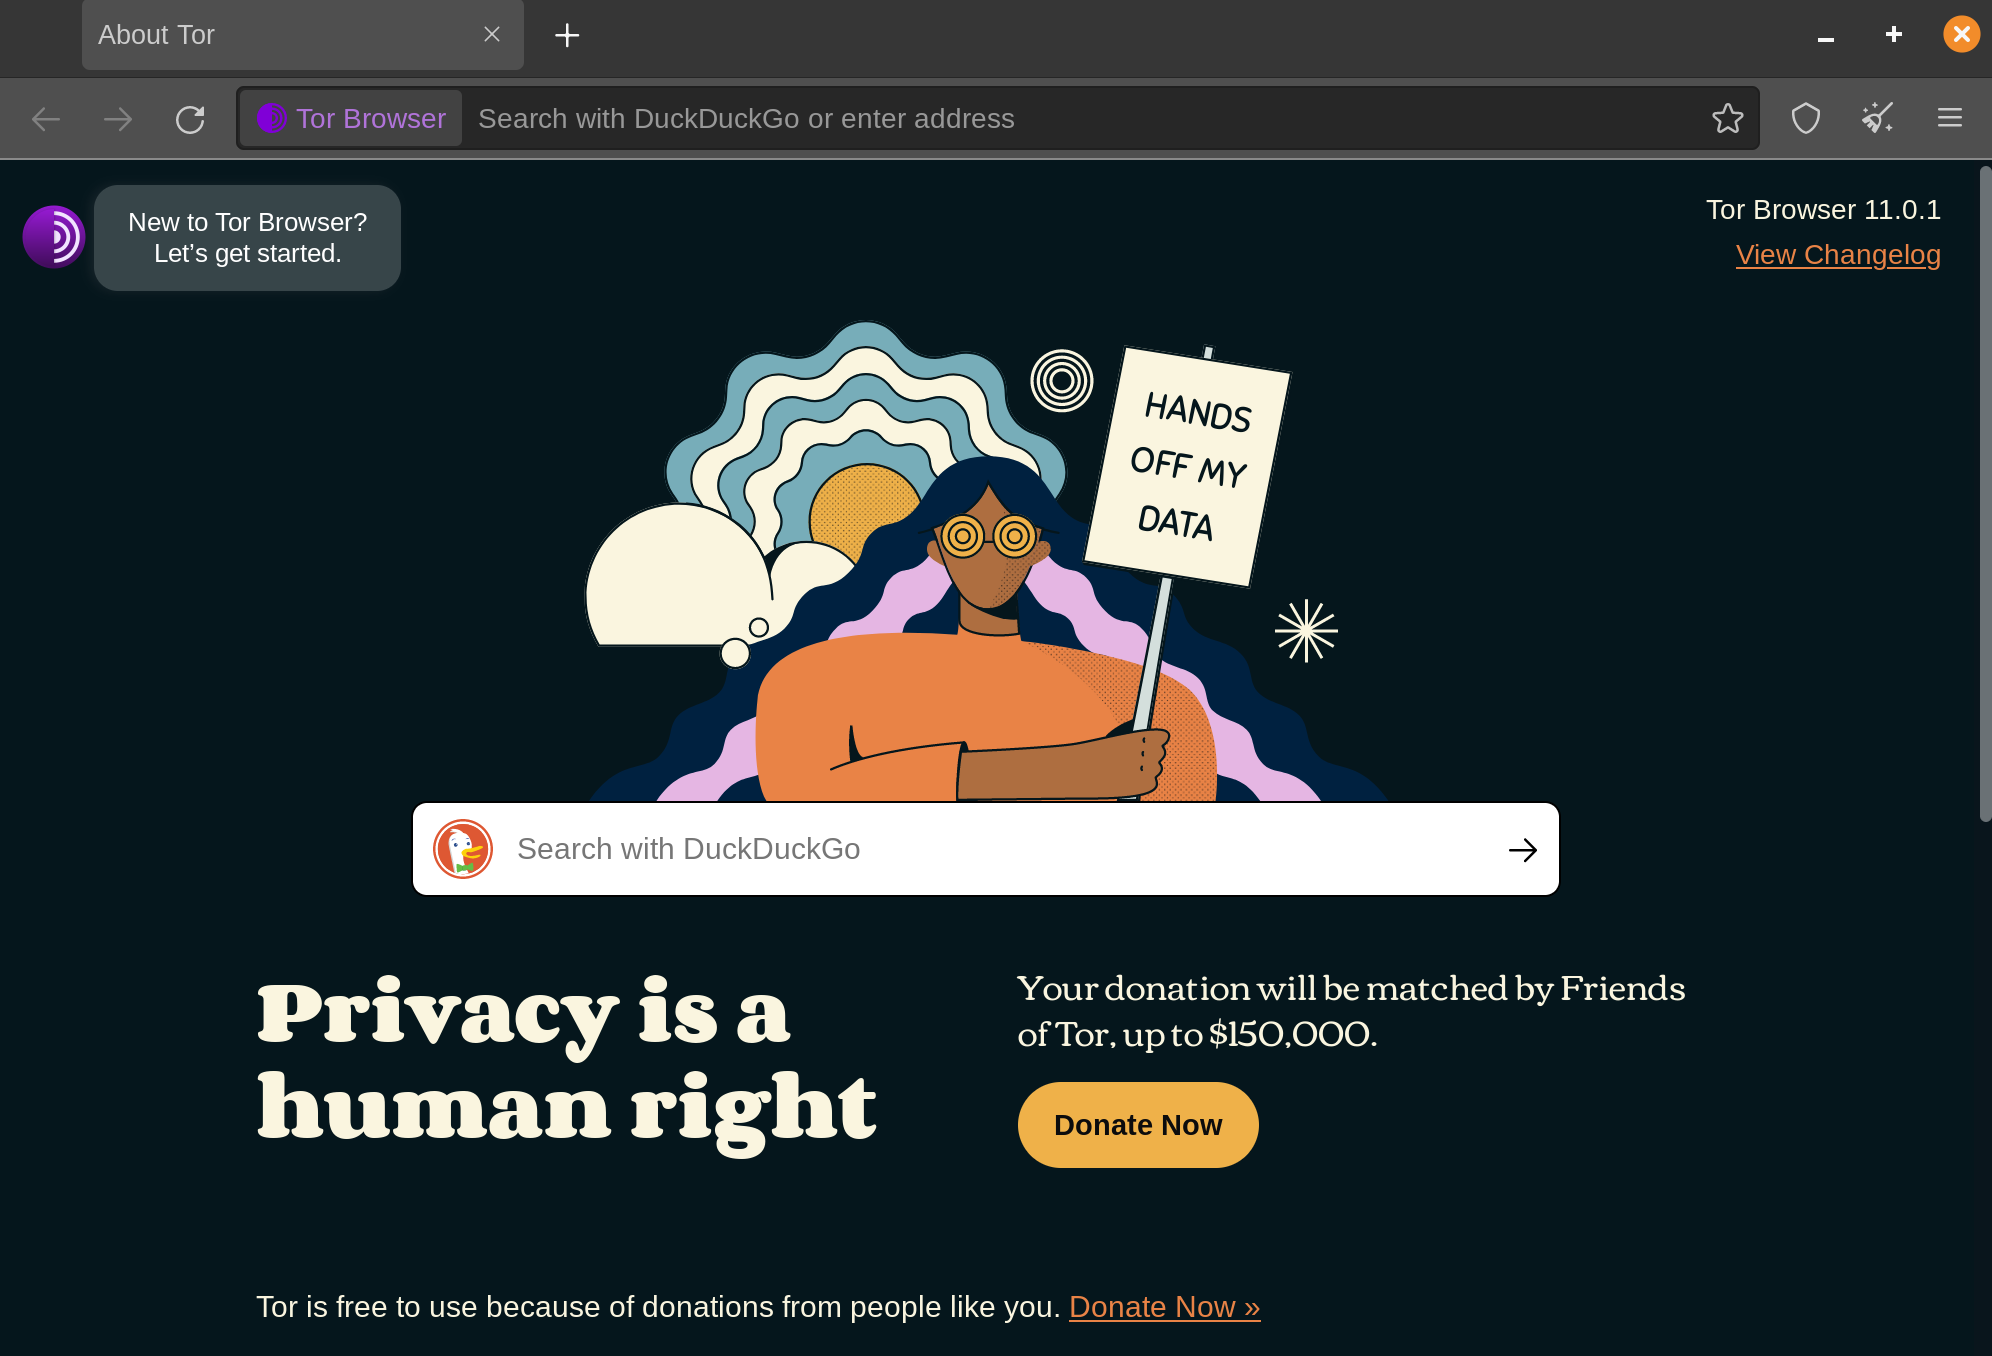 Tor Browser: An anonymous browser that routes traffic through a global network of servers.
Vivaldi: A highly customizable browser with unique features like tab stacks and notes.